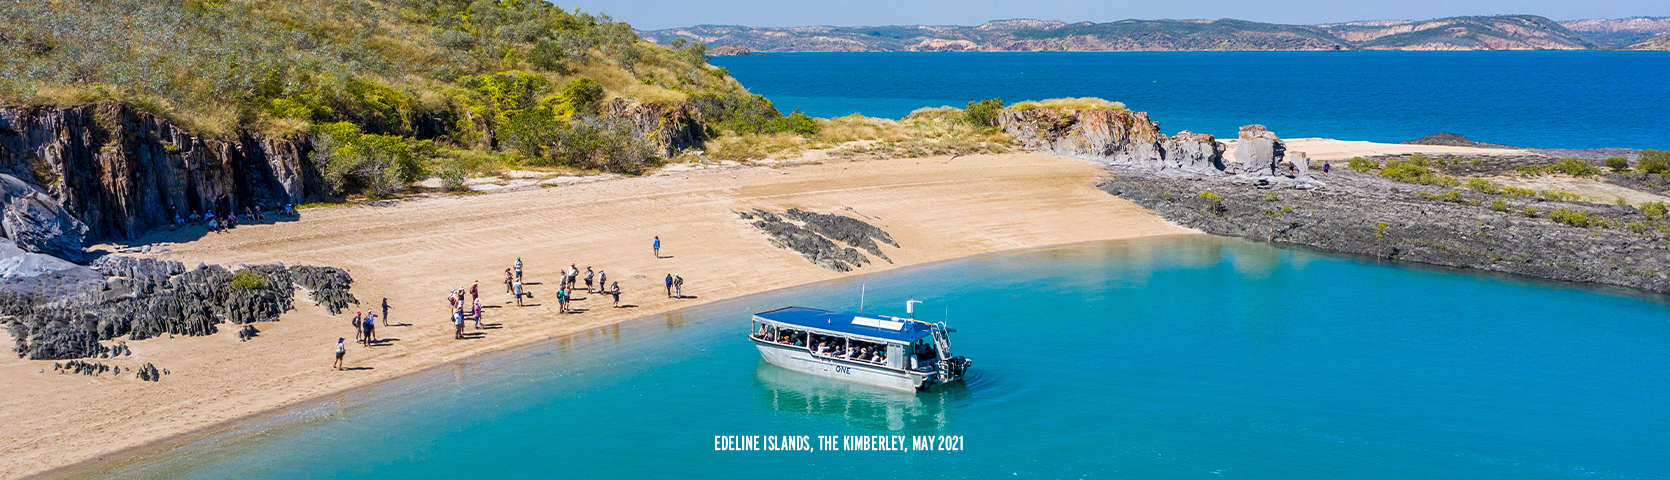 Edeline Islands Kimberley Cruise Coral Expeditions